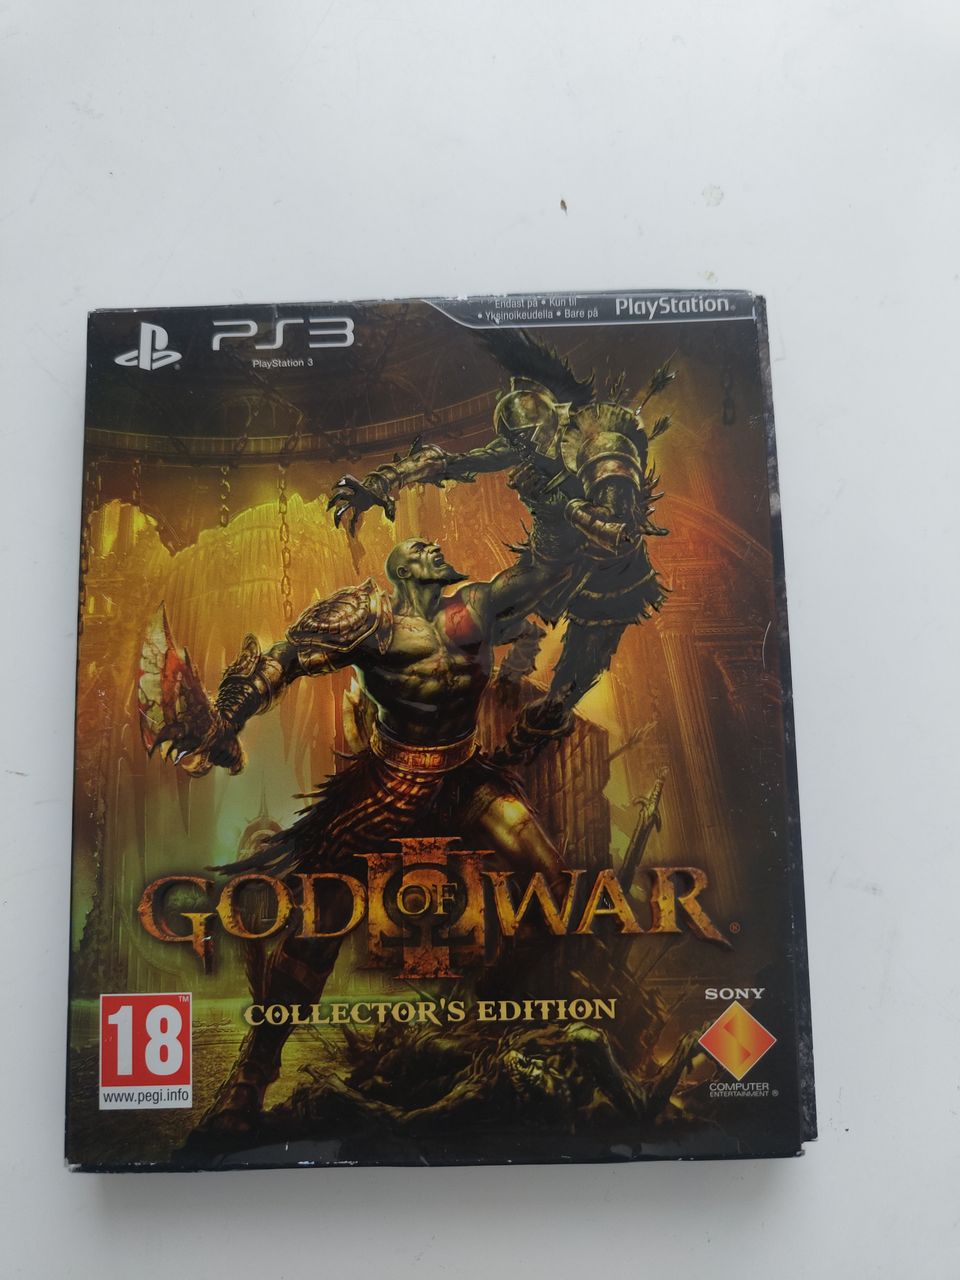 God of war 3 collector's edition